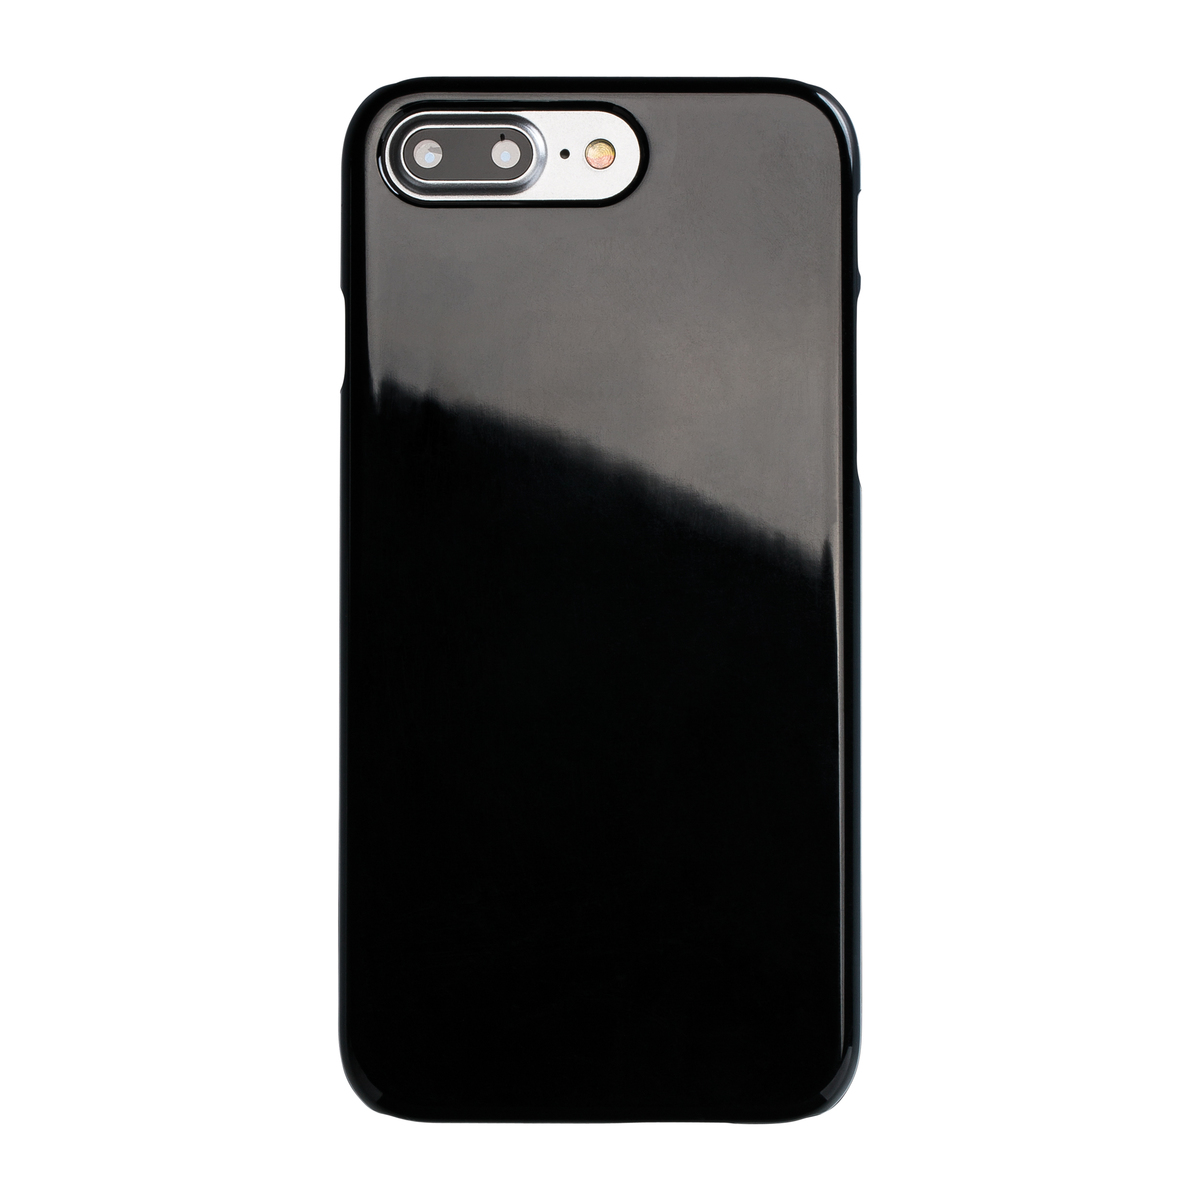 LM Smartphonecover REFLECTS-COVER XI IPhone 7 BLACK schwarz